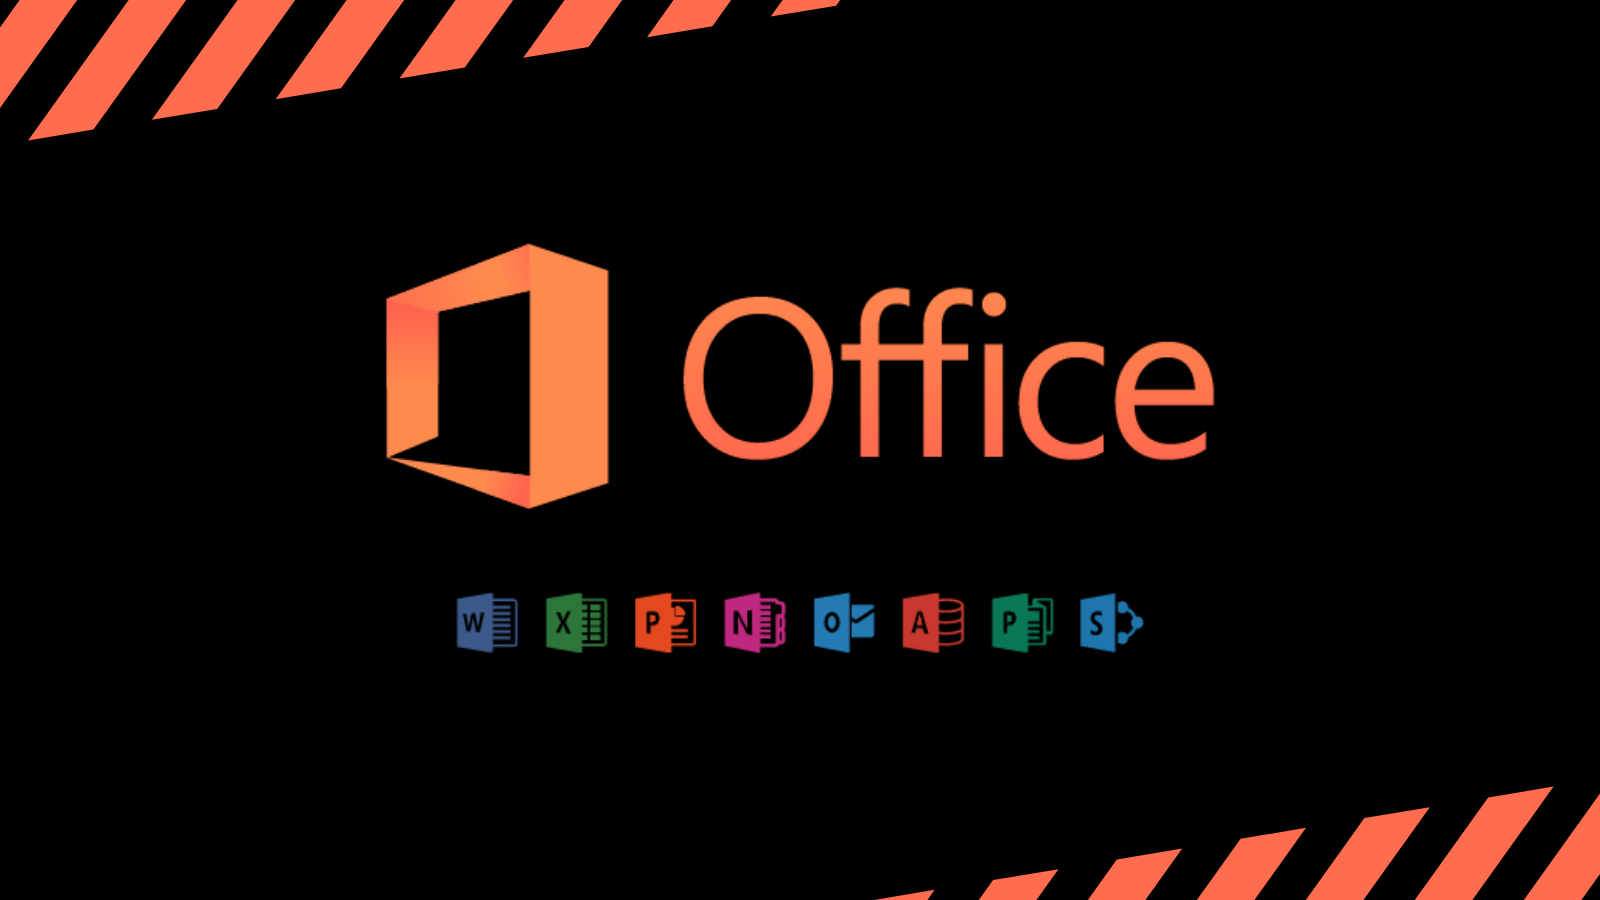 Microsoft Office Wallpapers - Wallpaper Cave